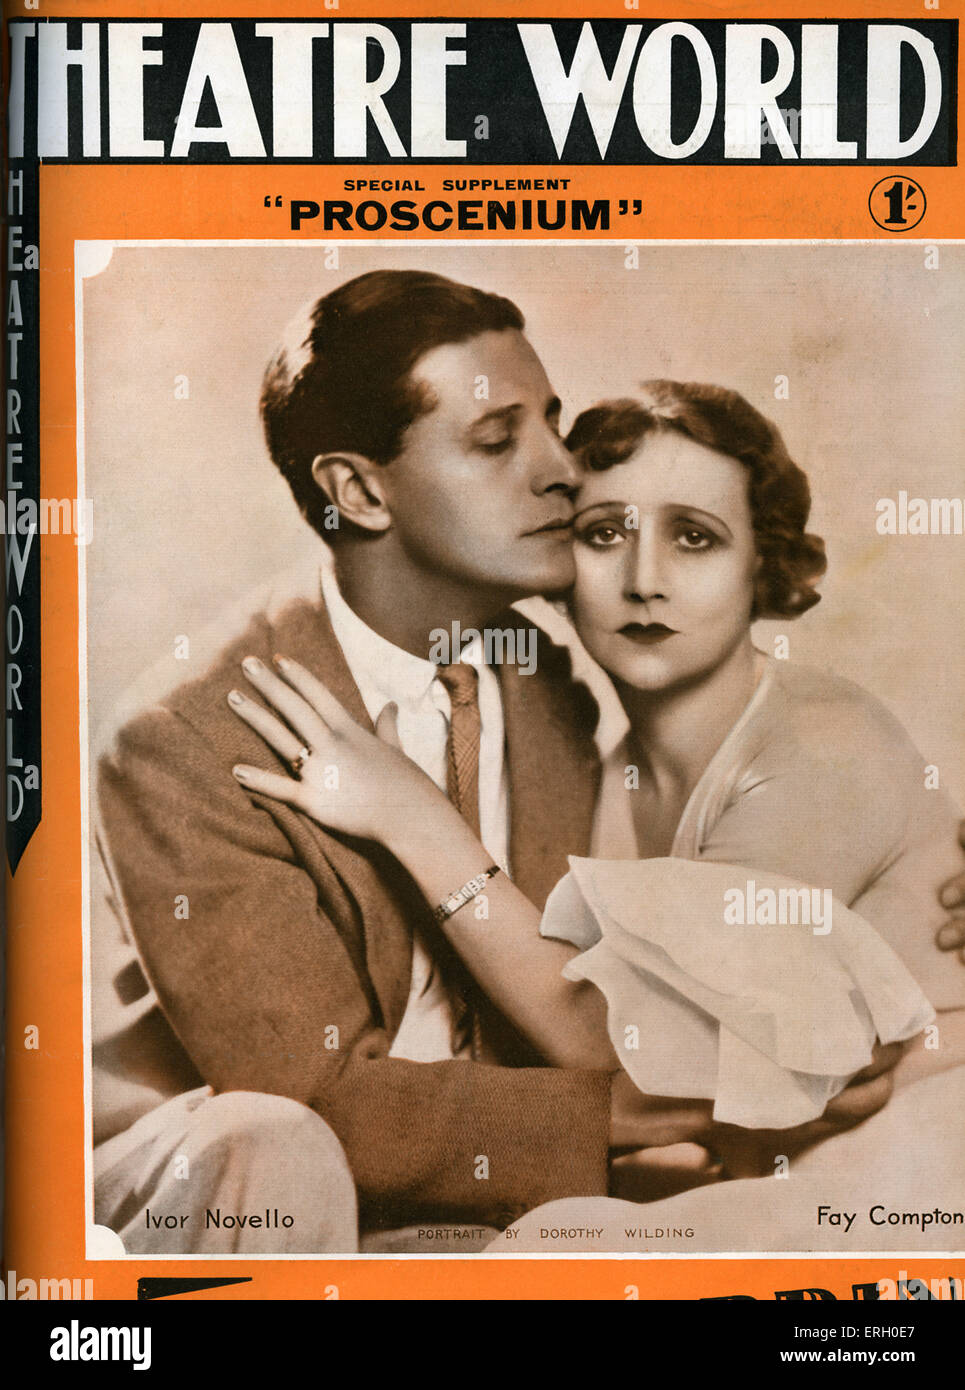 Ivor Novello and Fay Compton on the cover of Theatre World, August 1933. Special supplement for 'Proscenium' by Ivor Novello at Globe Theatre. IV: Welsh composer, singer and actor, 15 January 1893 – 6 March1951. FC: English actress, 18 September 1894 - 12 December 1978. Photo by Dorothy Wilding. Stock Photo